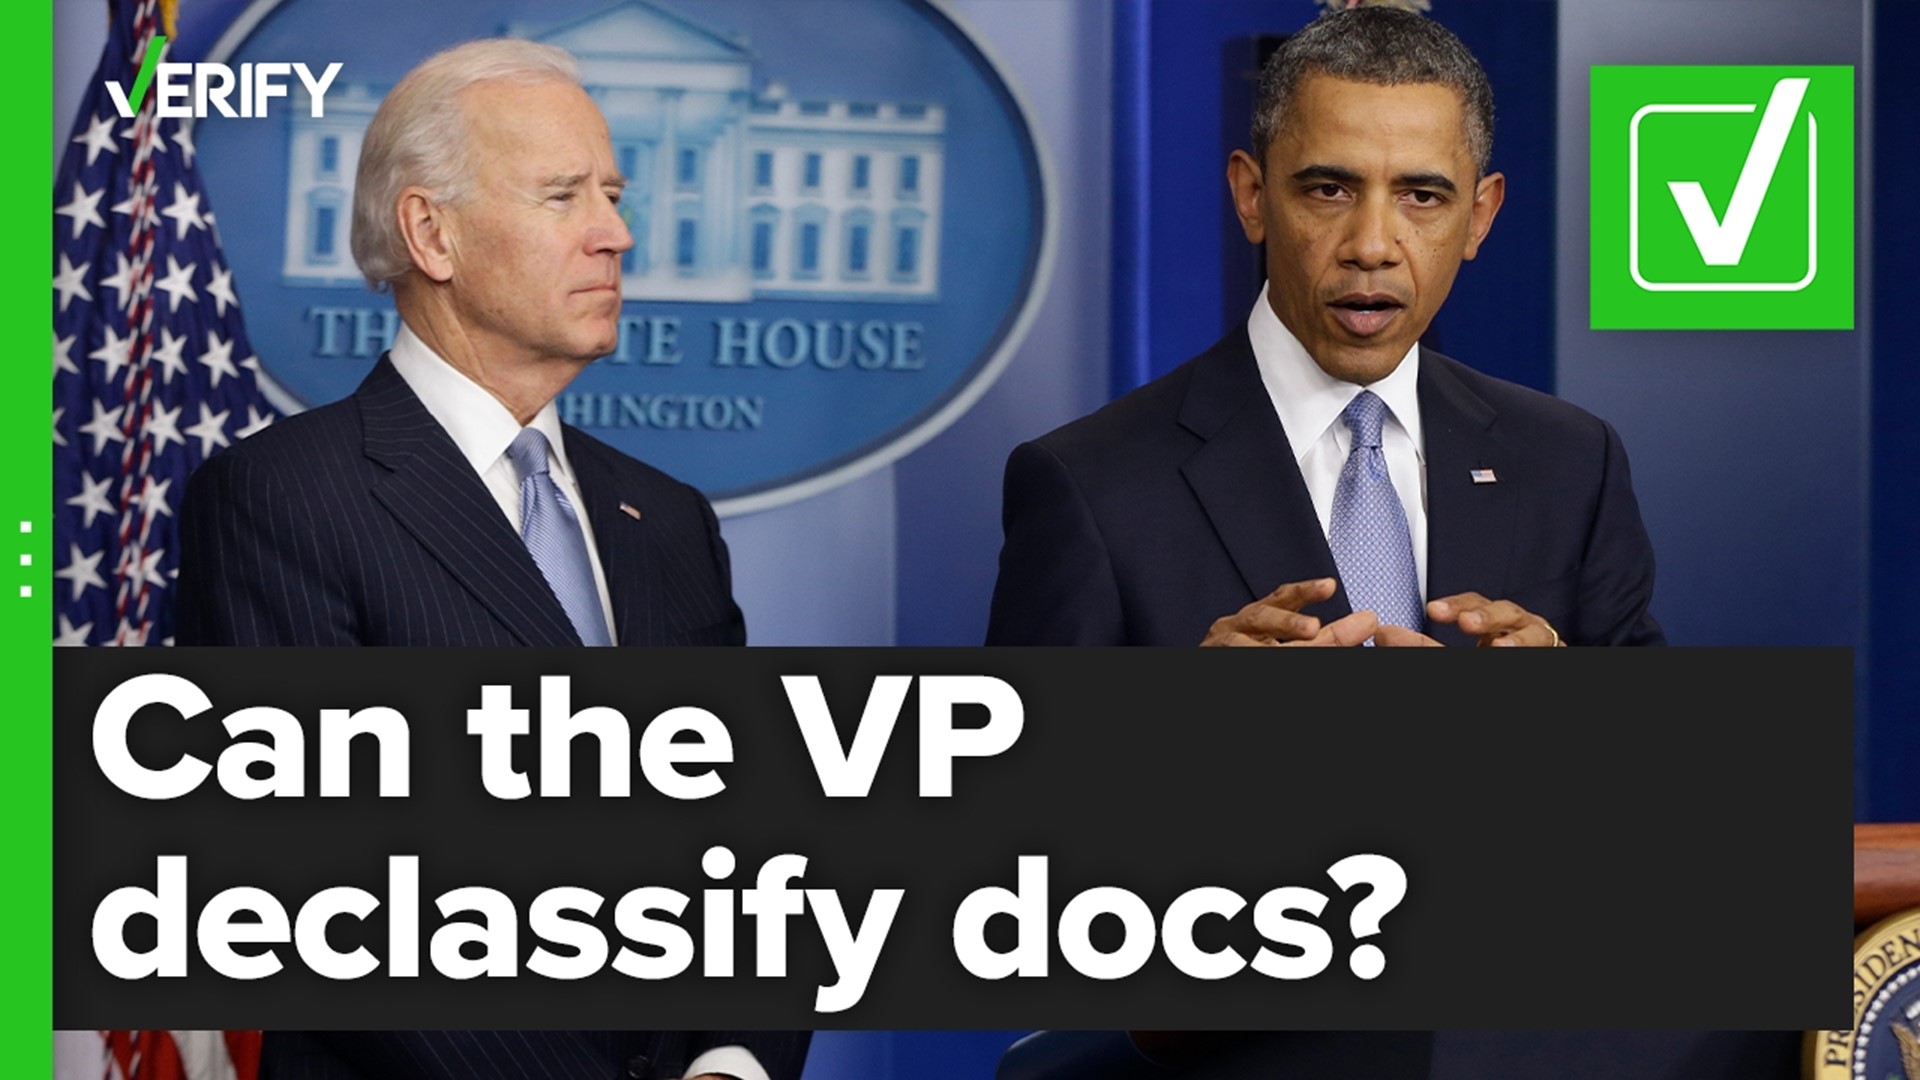 Several VERIFY readers asked if a vice president can declassify documents. They can – here’s why.